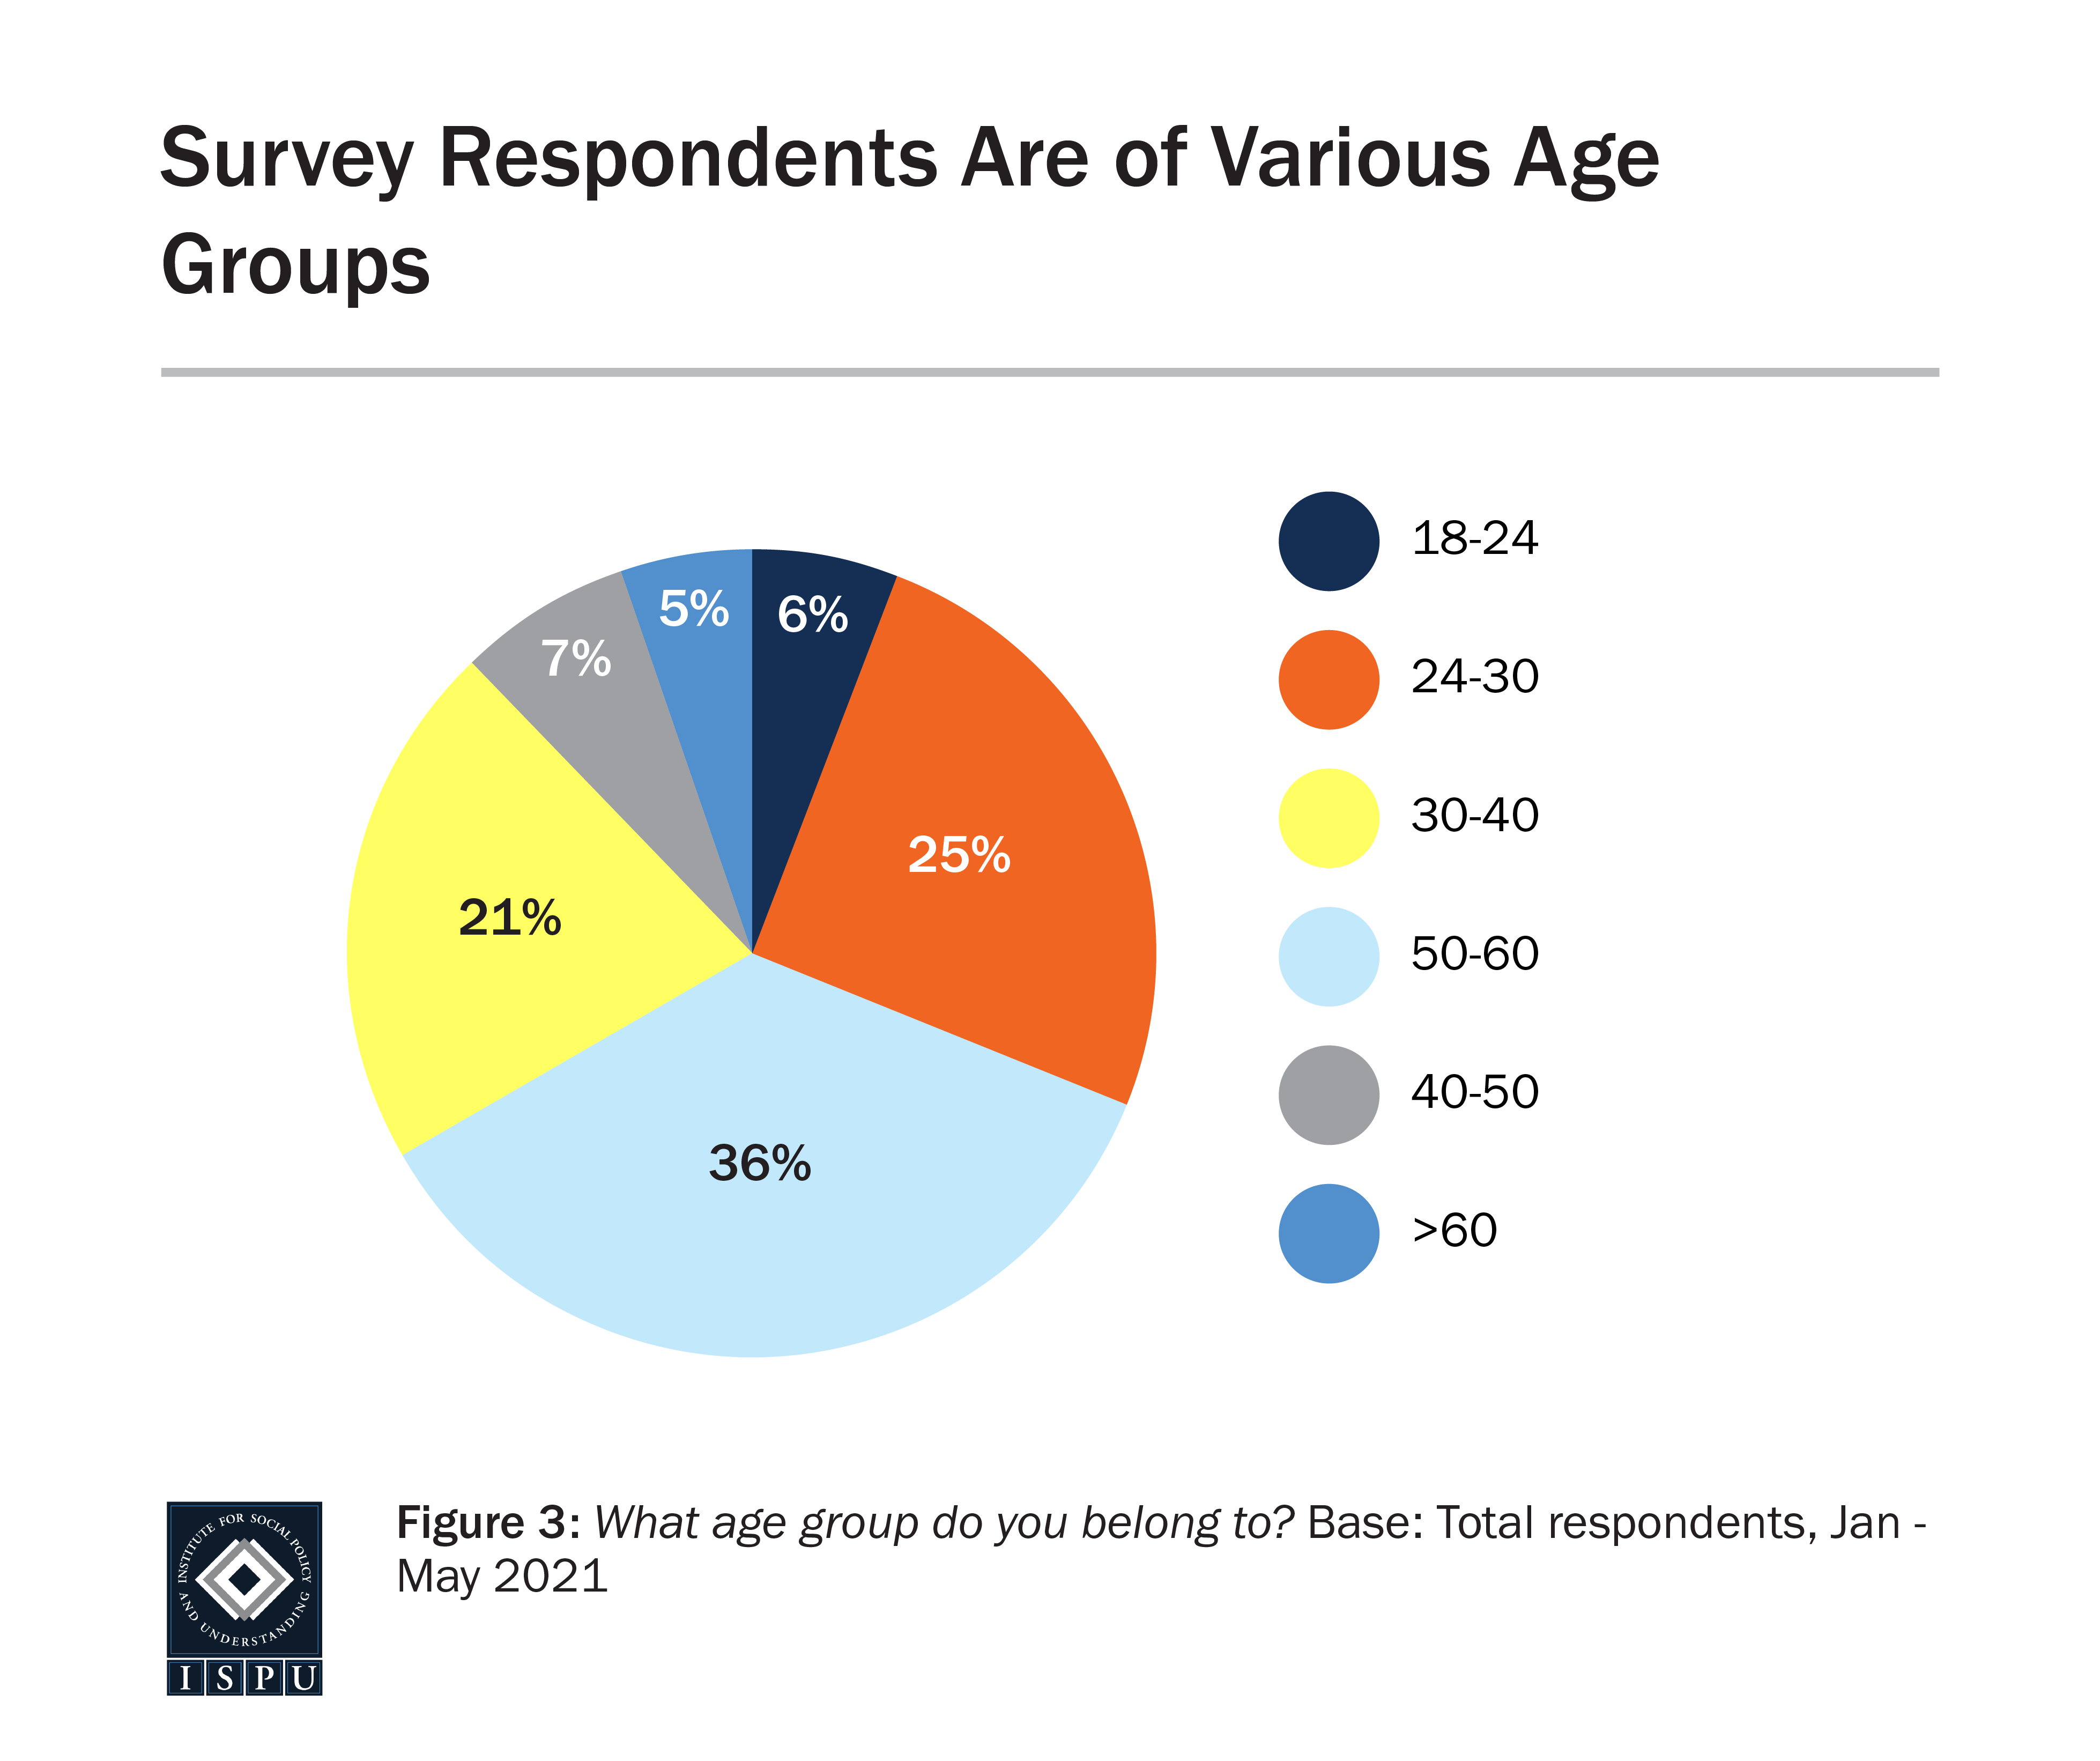 Graph displaying: pie chart showing age ranges of survey respondents, with largest representing 50-60 year olds and 24-30 year olds